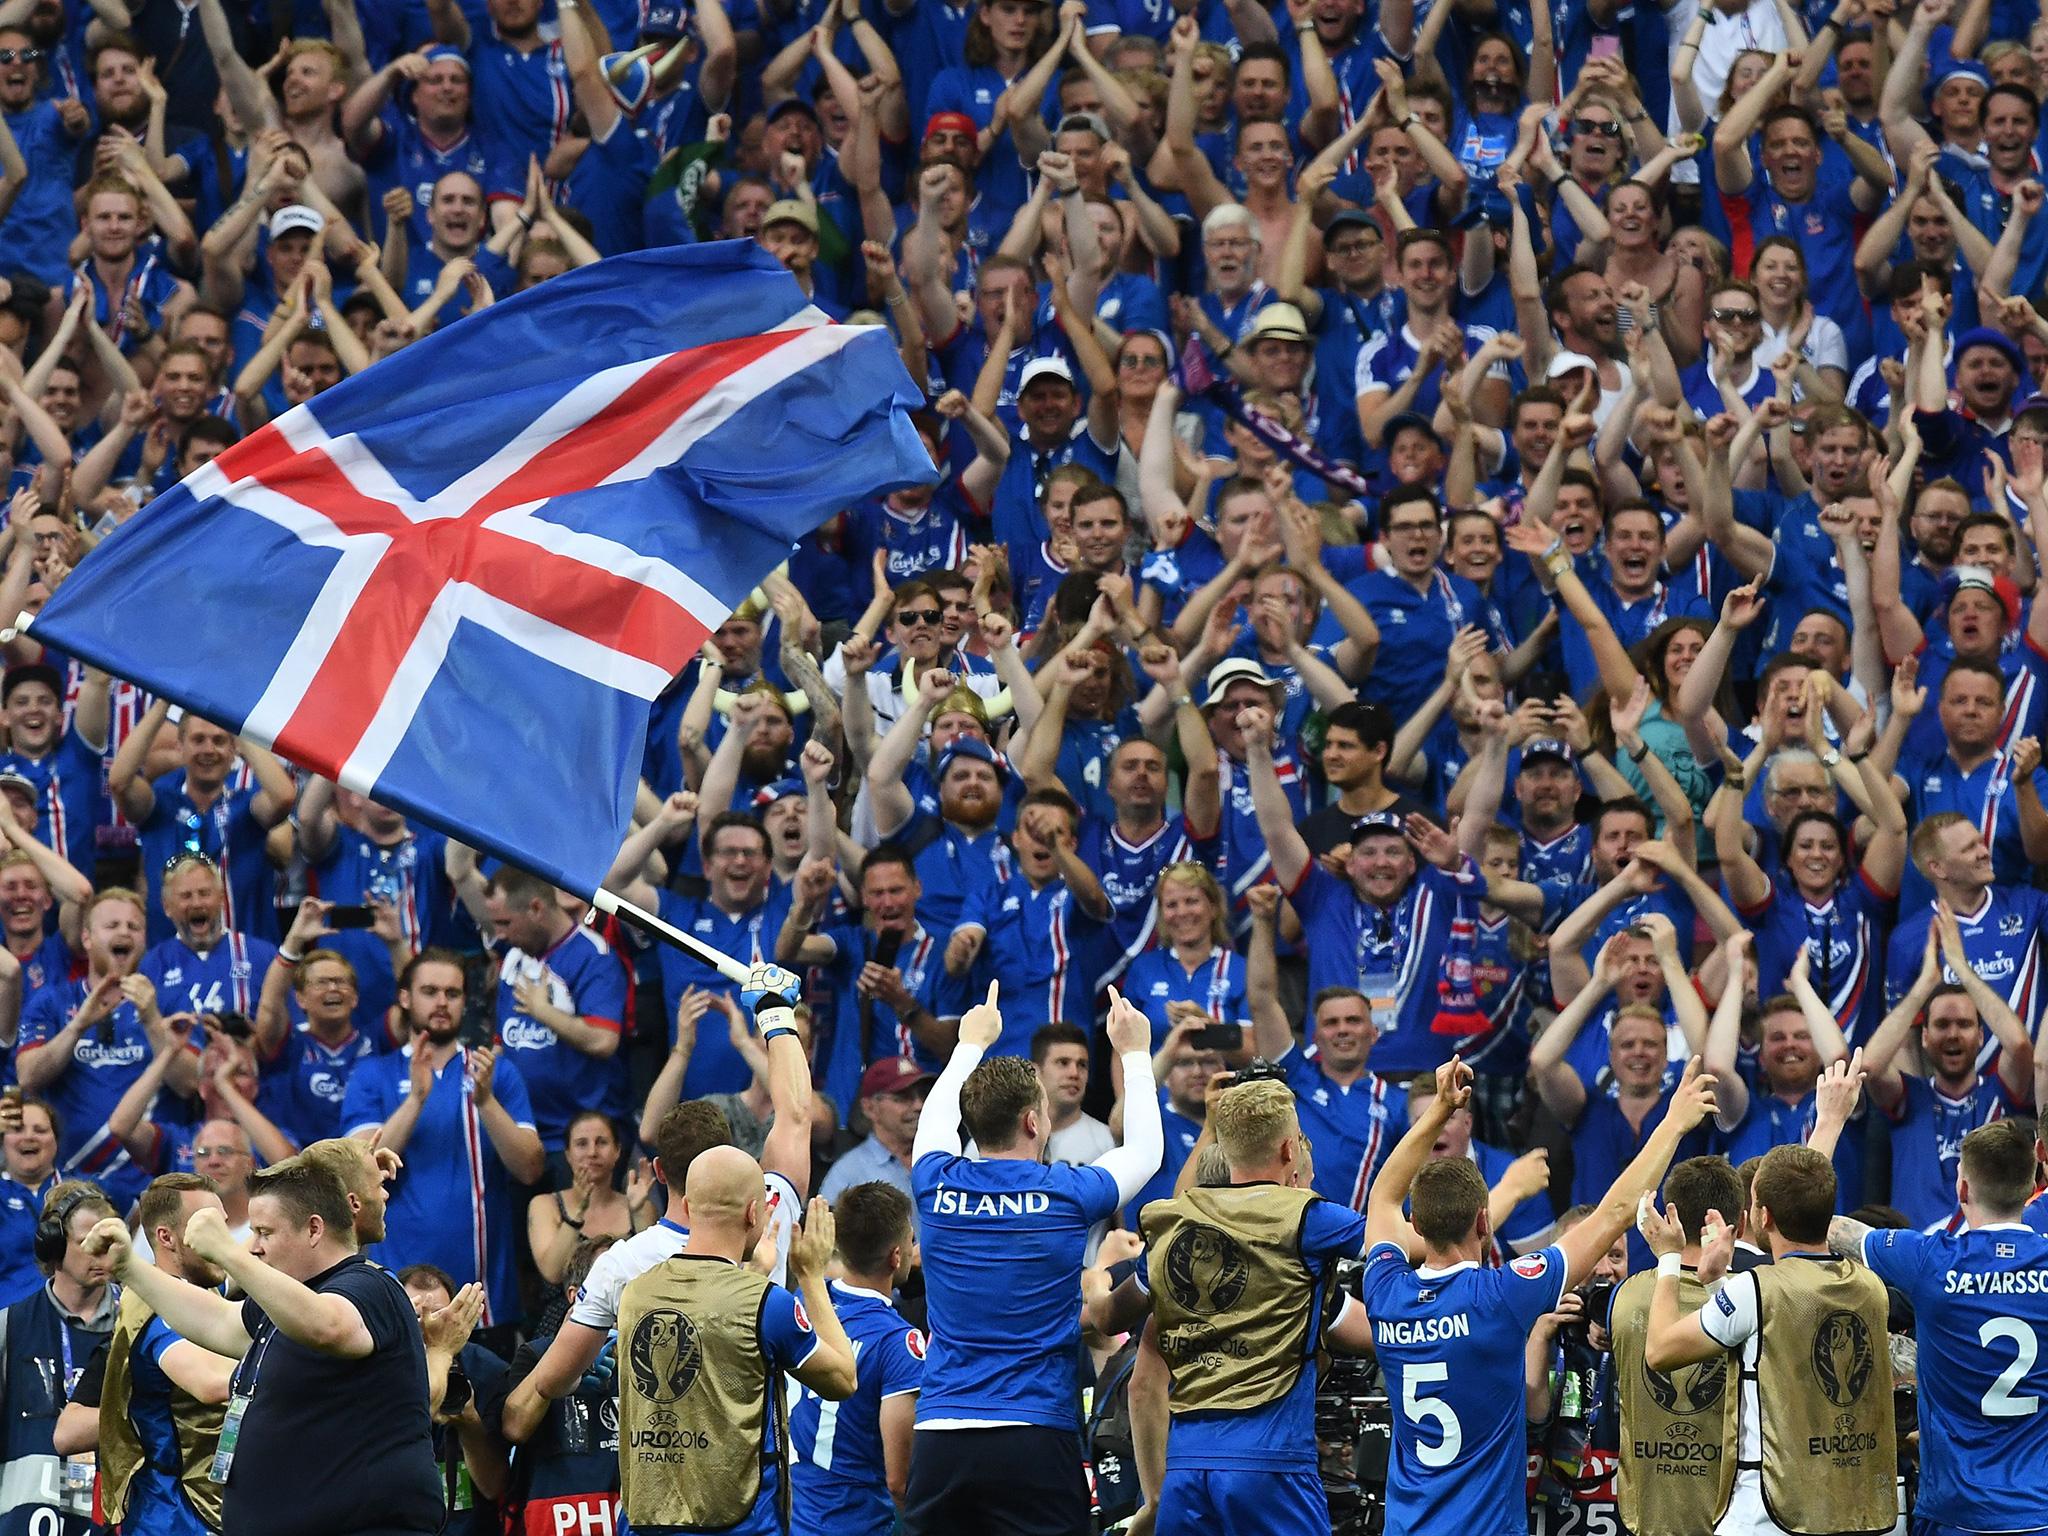 Iceland will play England in Nice on Monday night